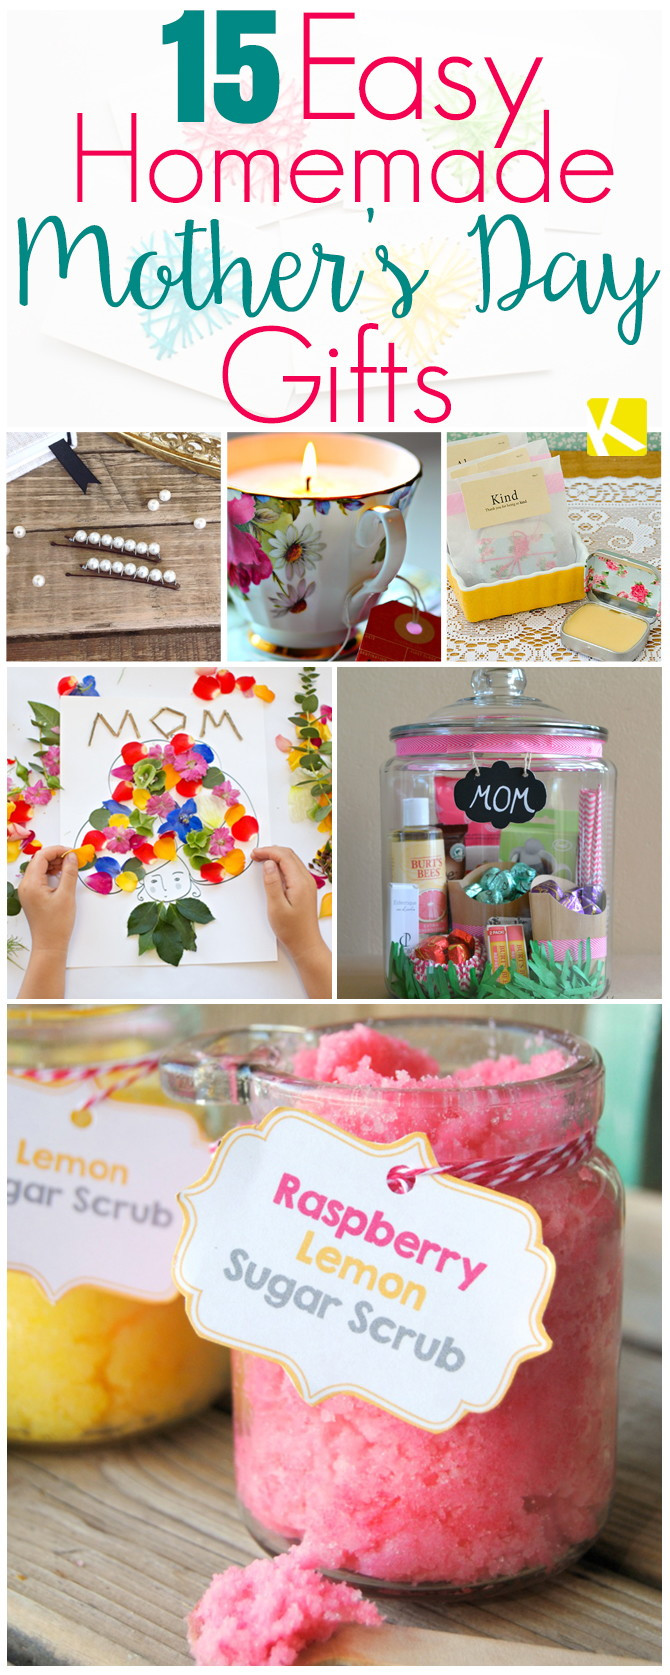 Mothers Day Gift Ideas Pinterest
 15 Mother’s Day Gifts That Are Ridiculously Easy to Make